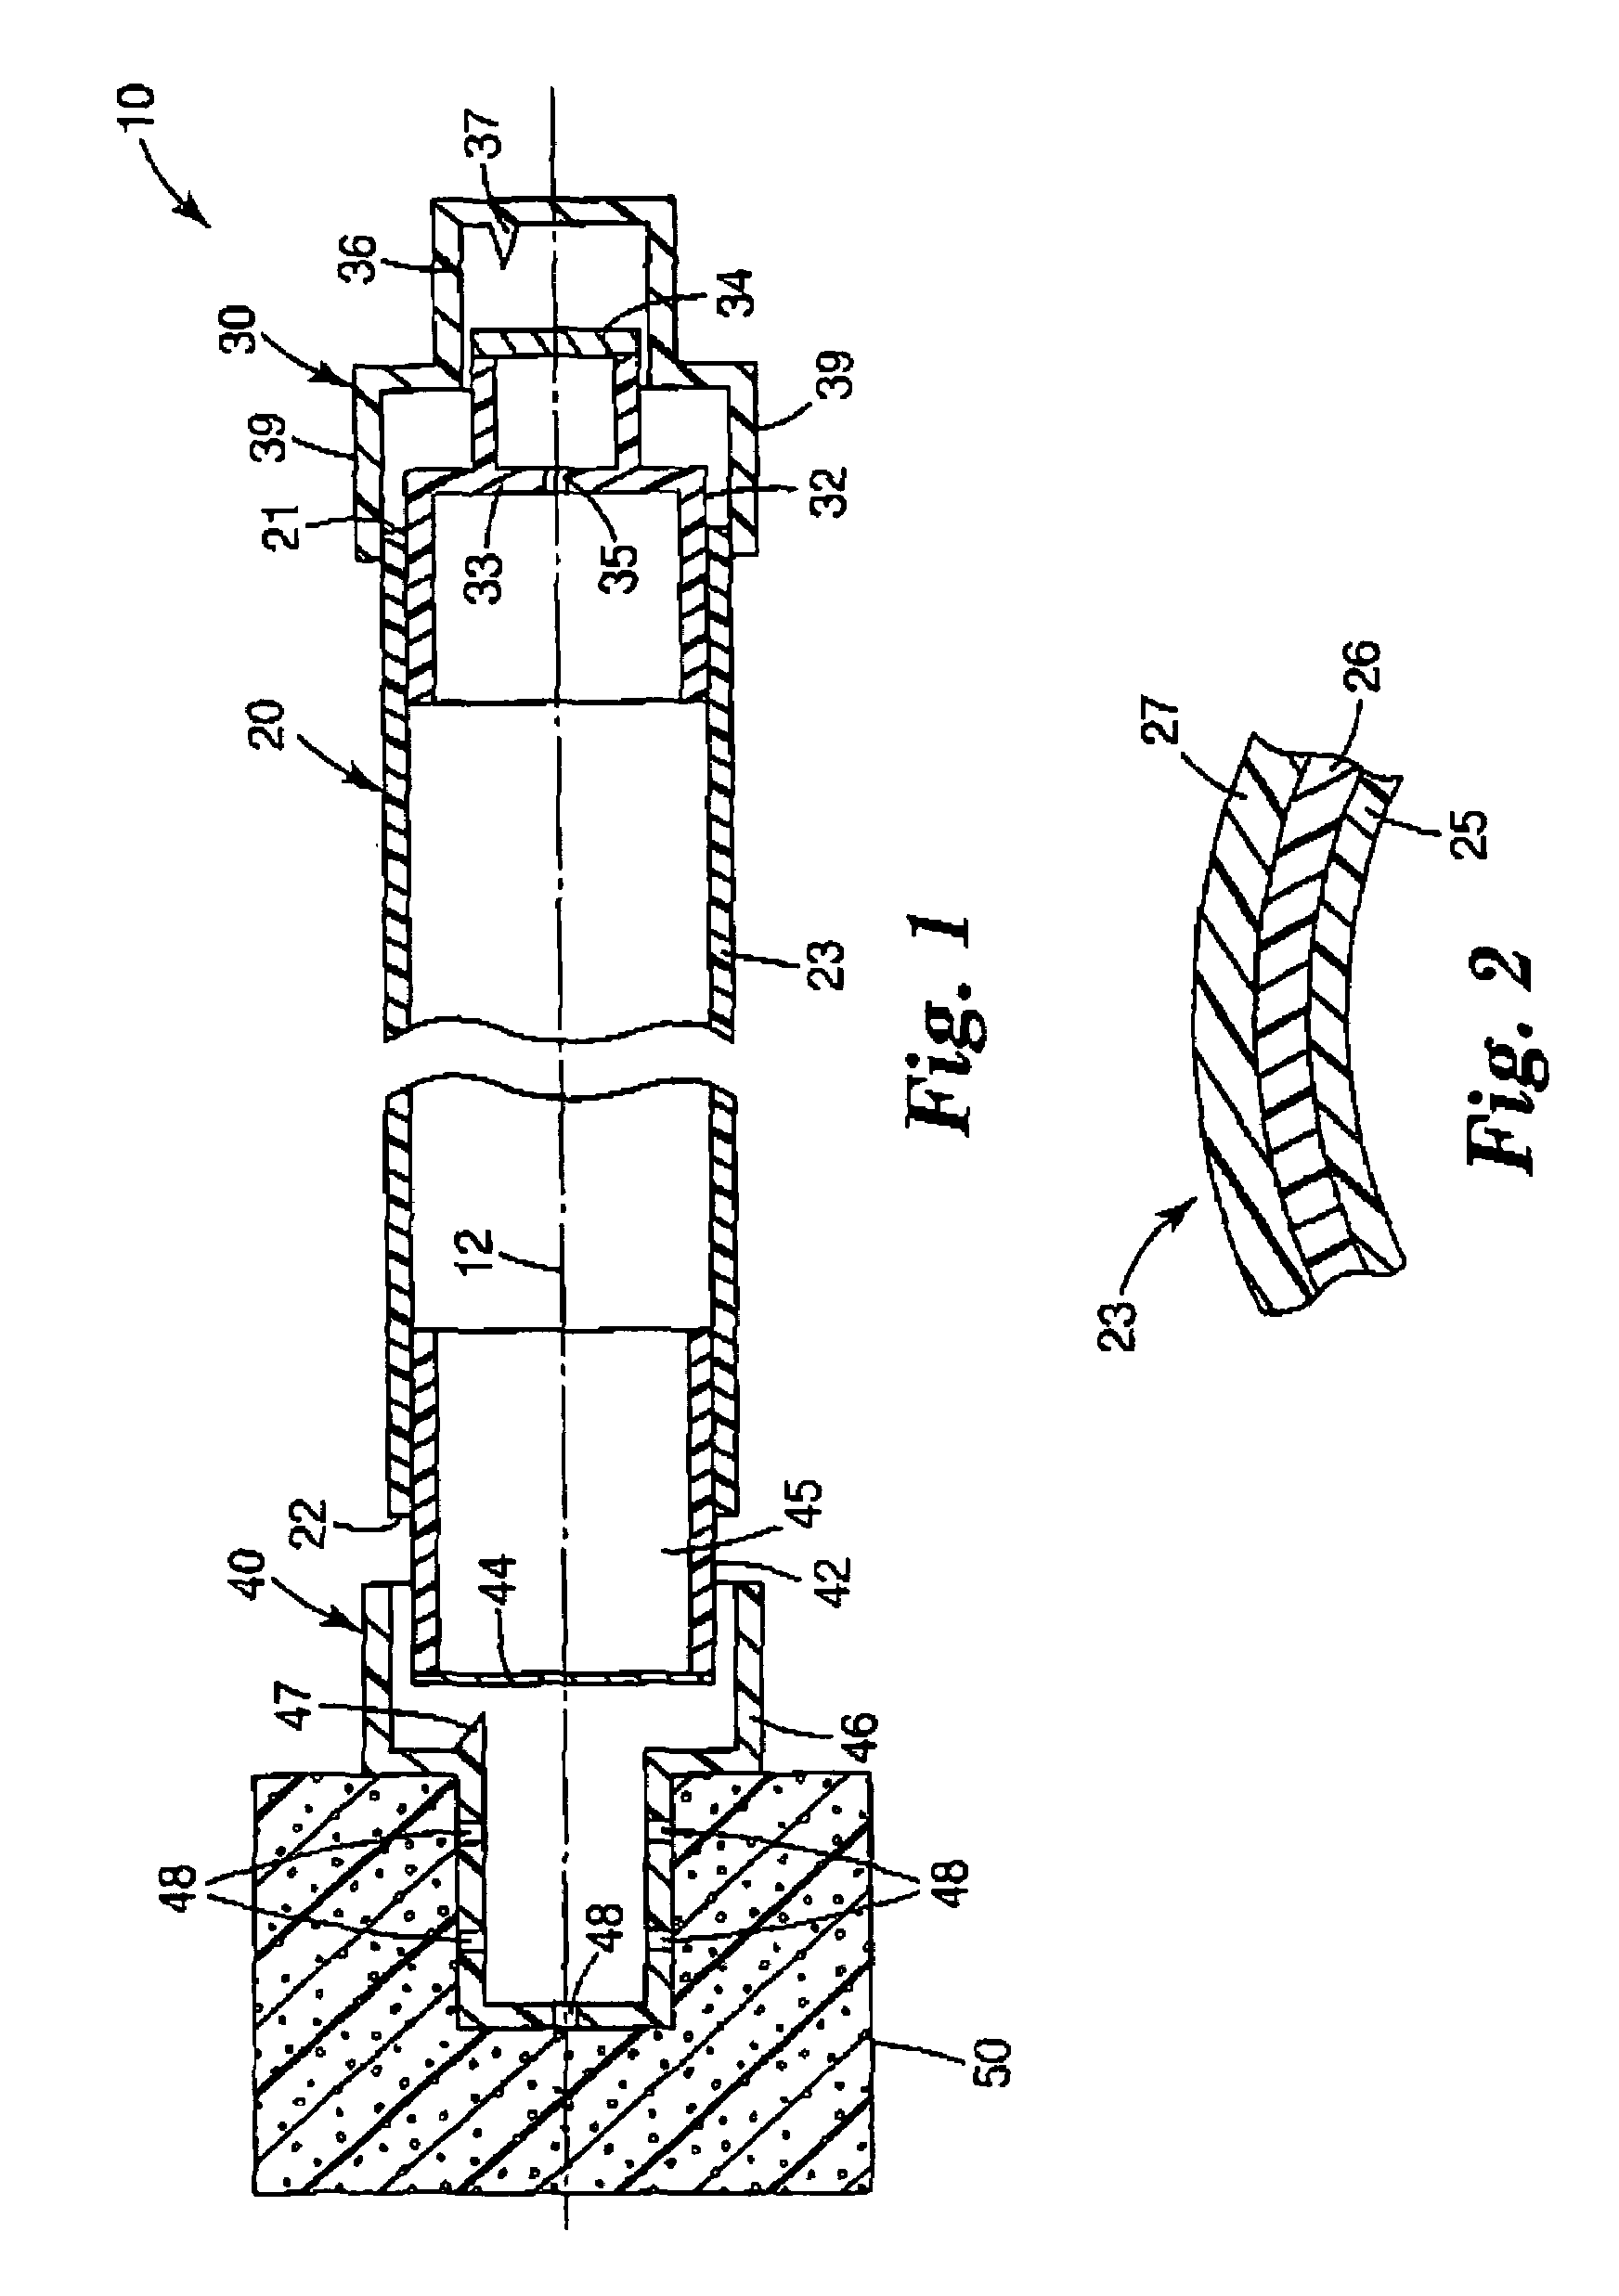 Skin antiseptic composition dispenser and methods of use